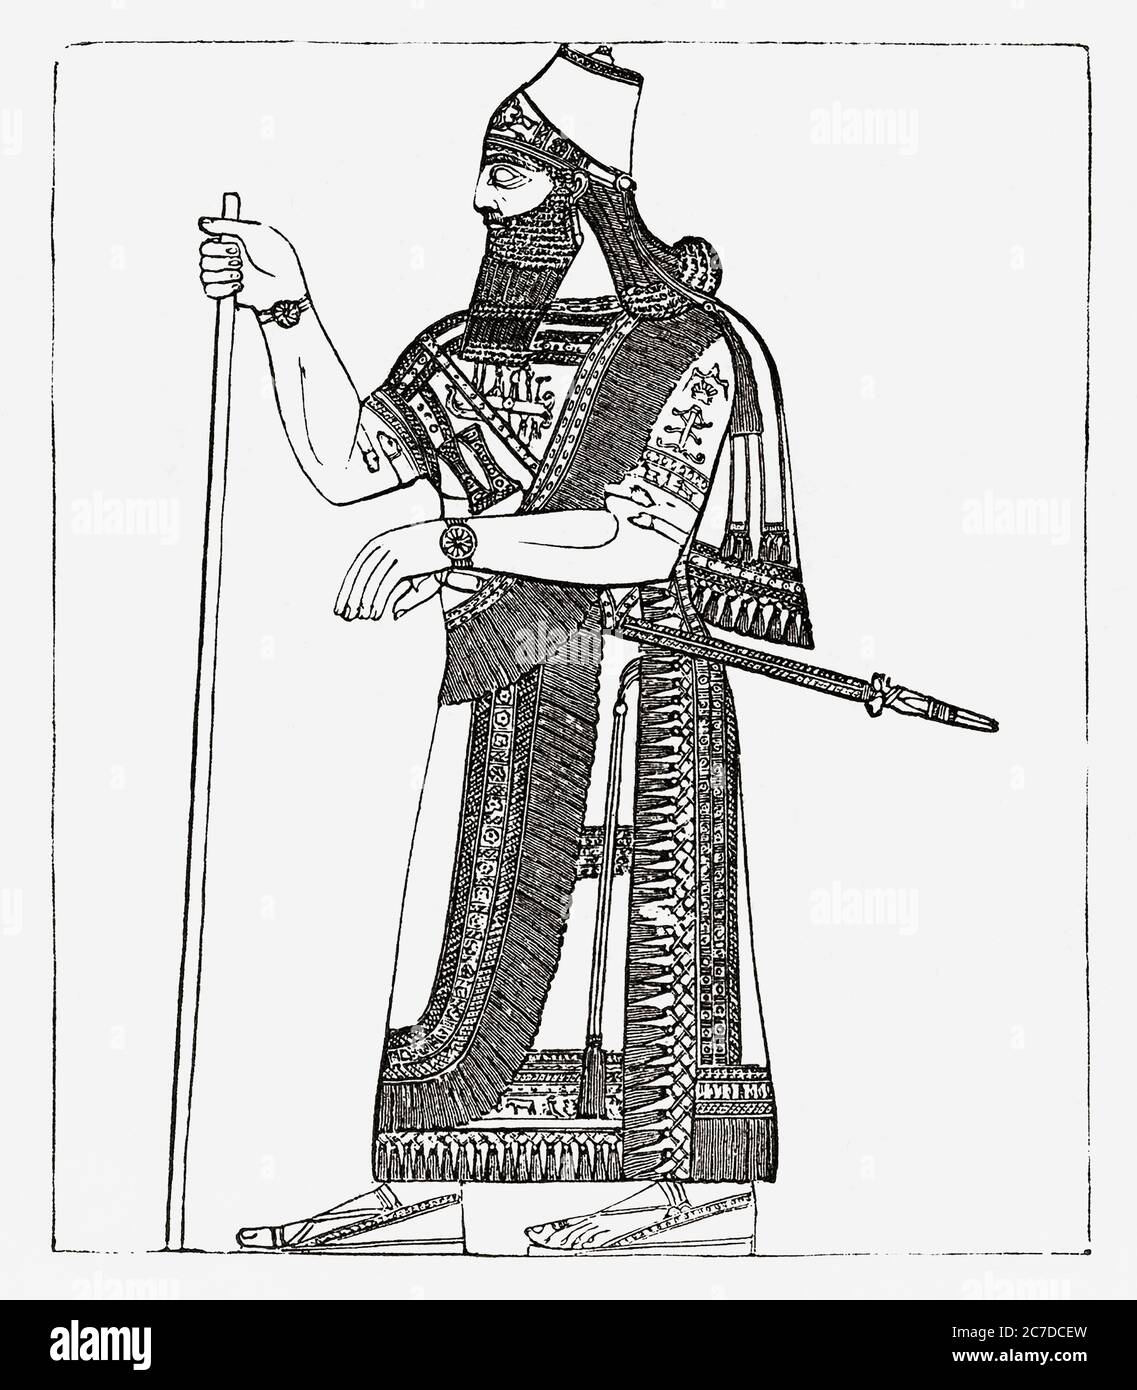 An Assyrian king.  Illustration by an unidentified 19th century artist based on a bas-relief from the North West palace at Nimrud. Stock Photo